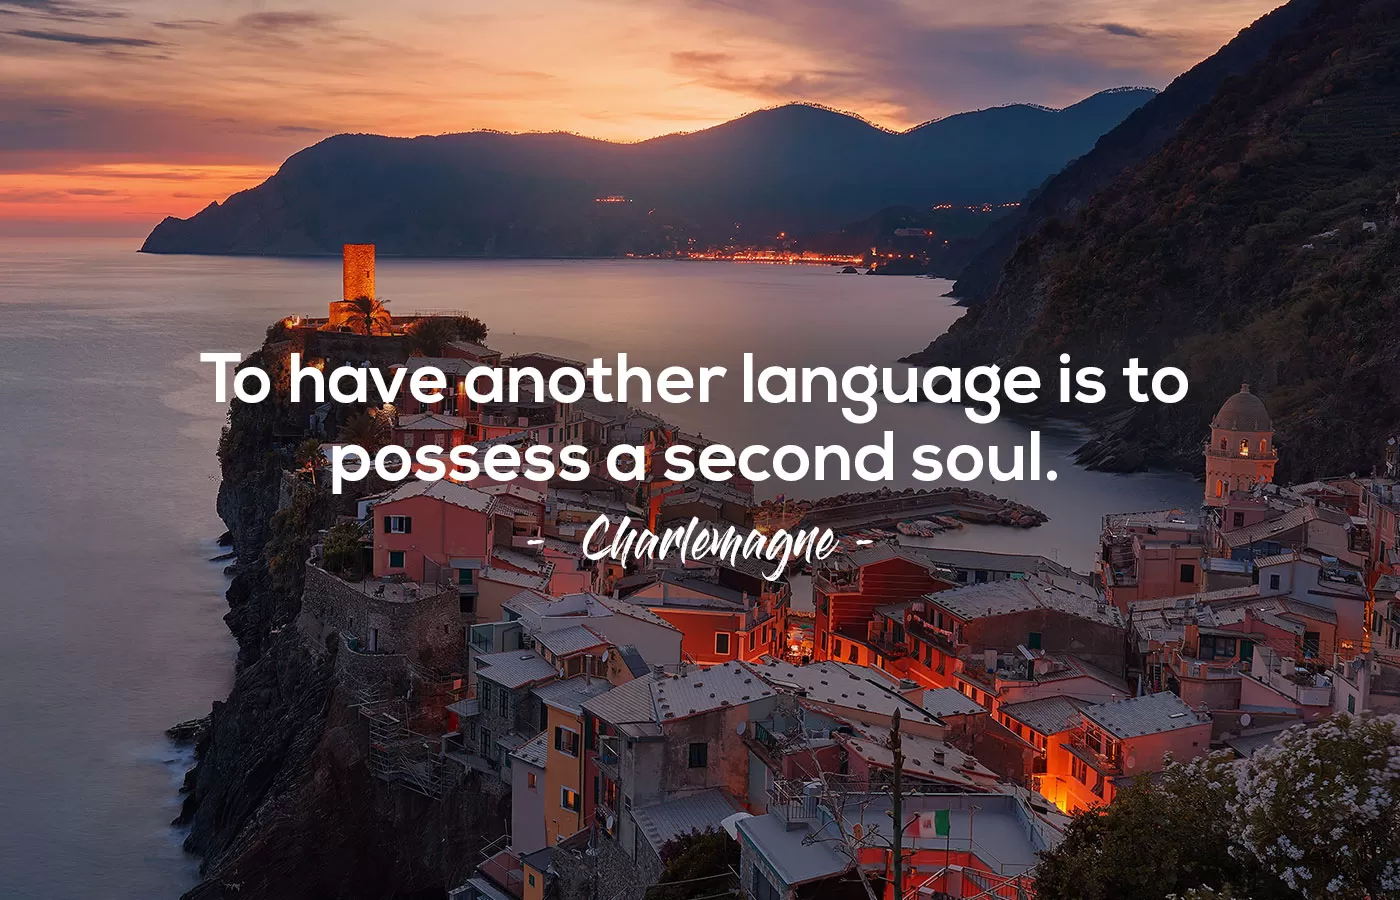 Motivation to learn a language - To have another language is to possess a second soul - Charlemagne